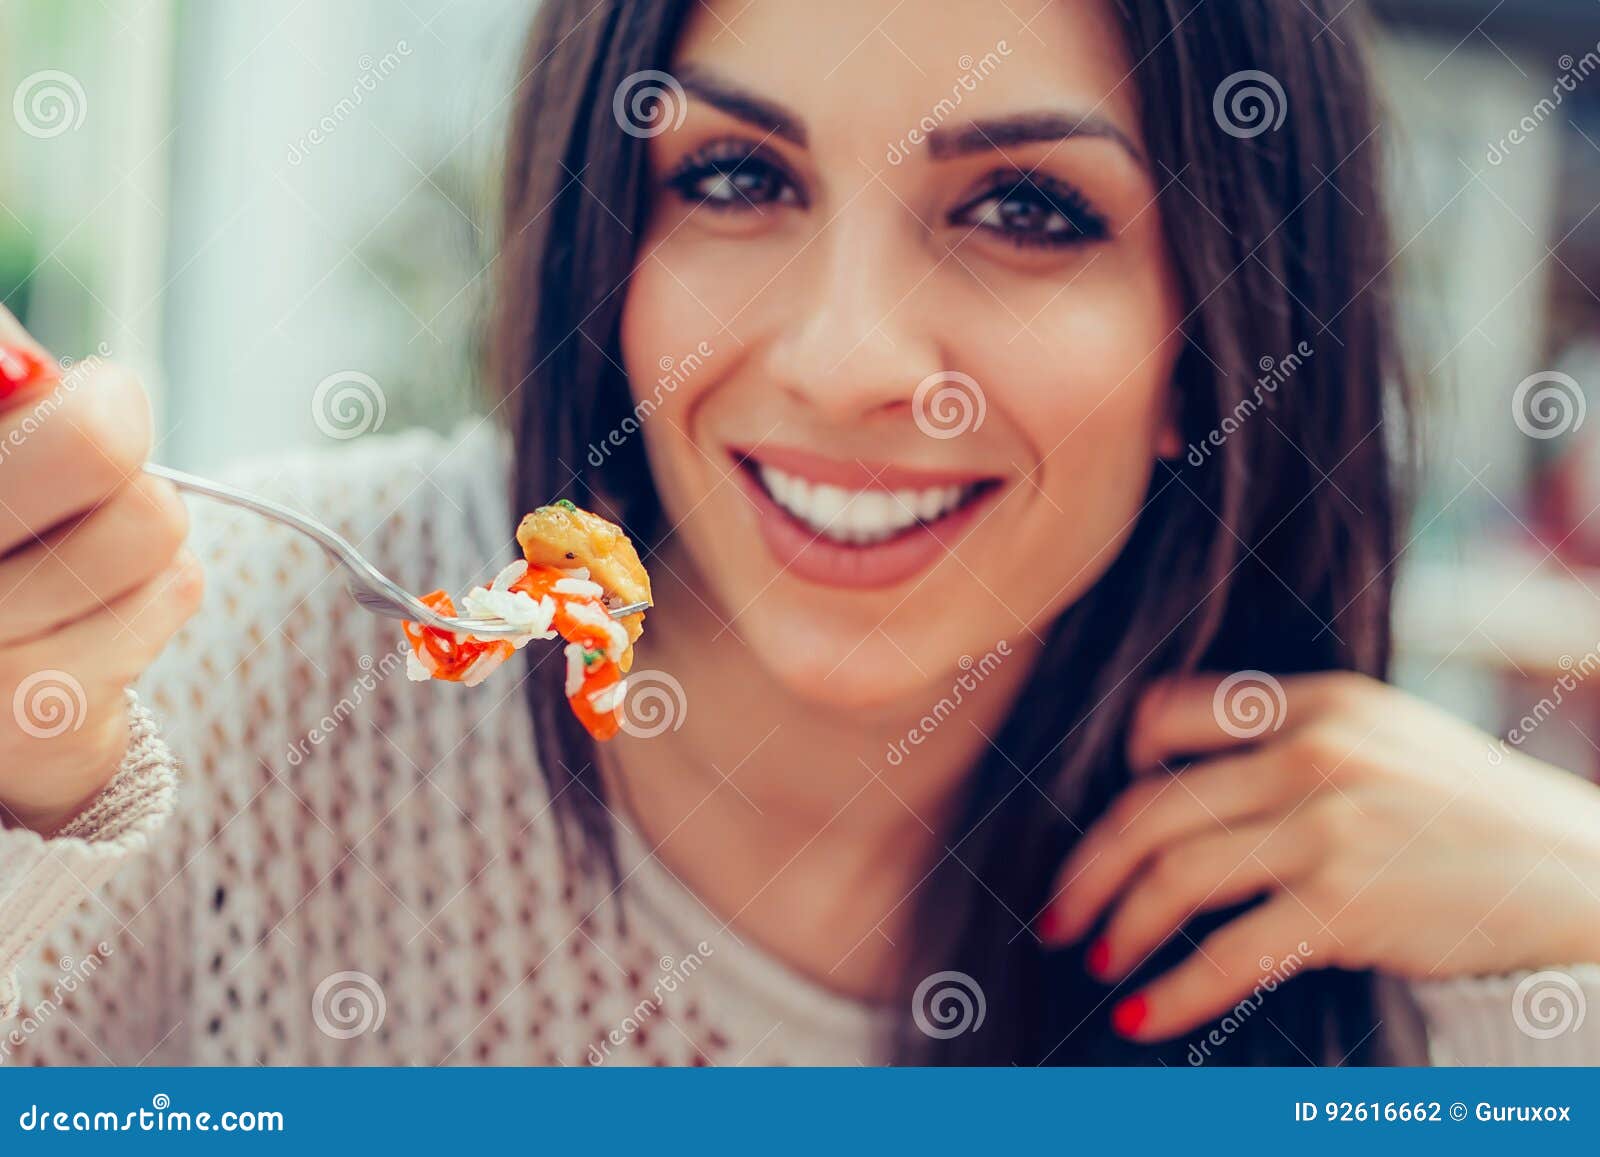 Young Woman Eating Chinese Food In A Restaurant Having Her Lunch Break